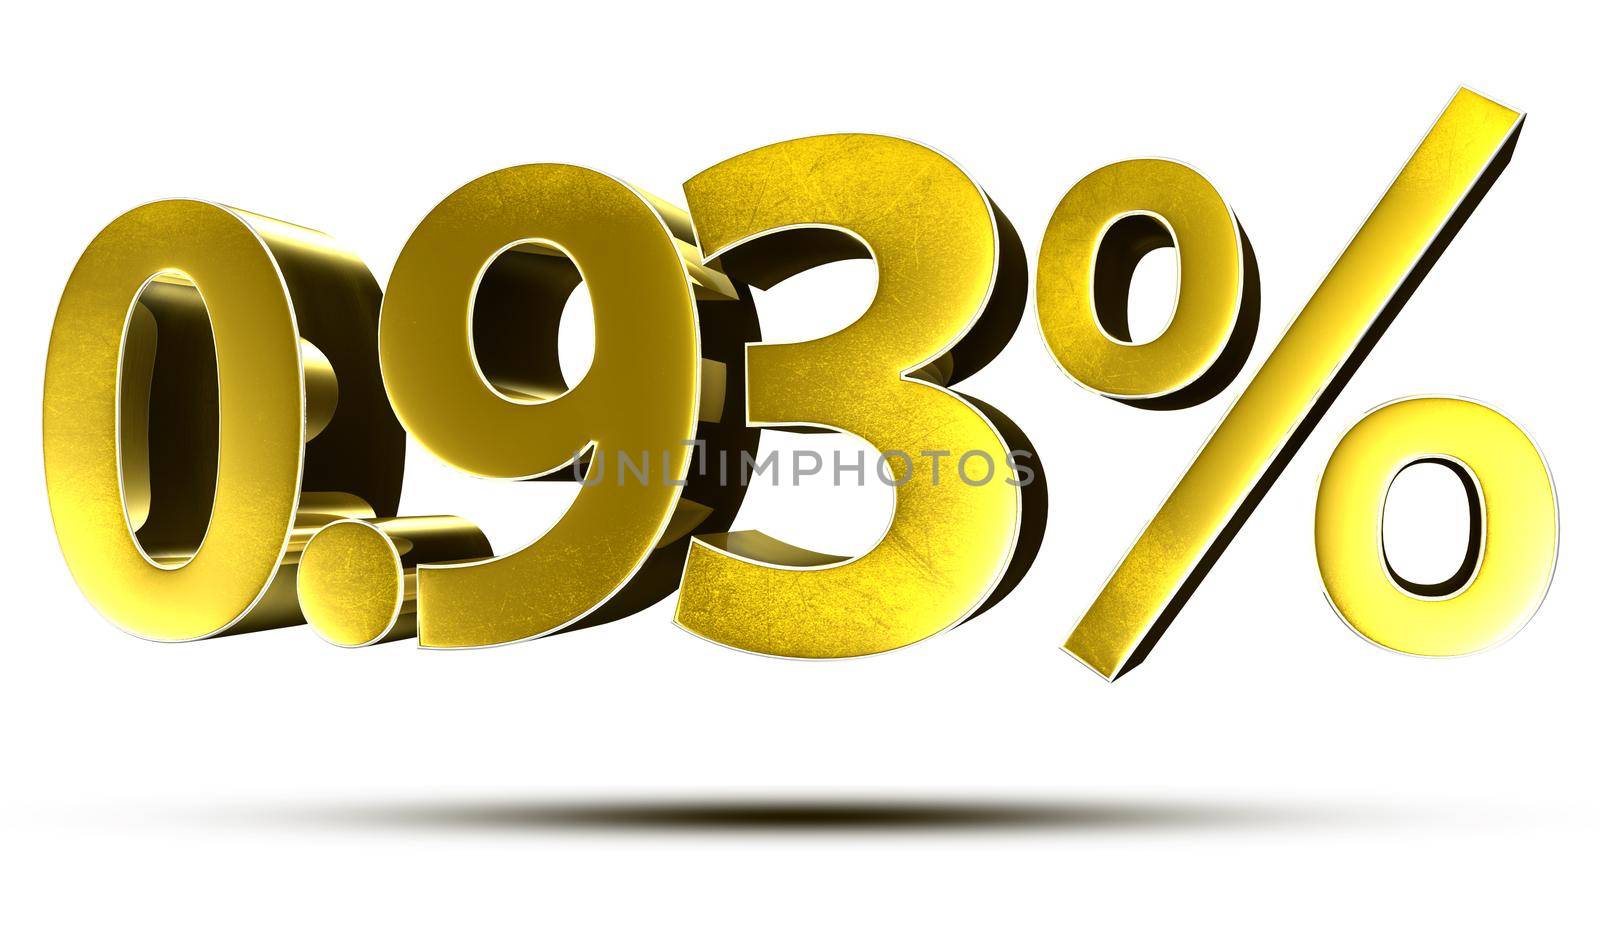 3D illustration 0.93 Percent Gold isolated on a white background with clipping path.